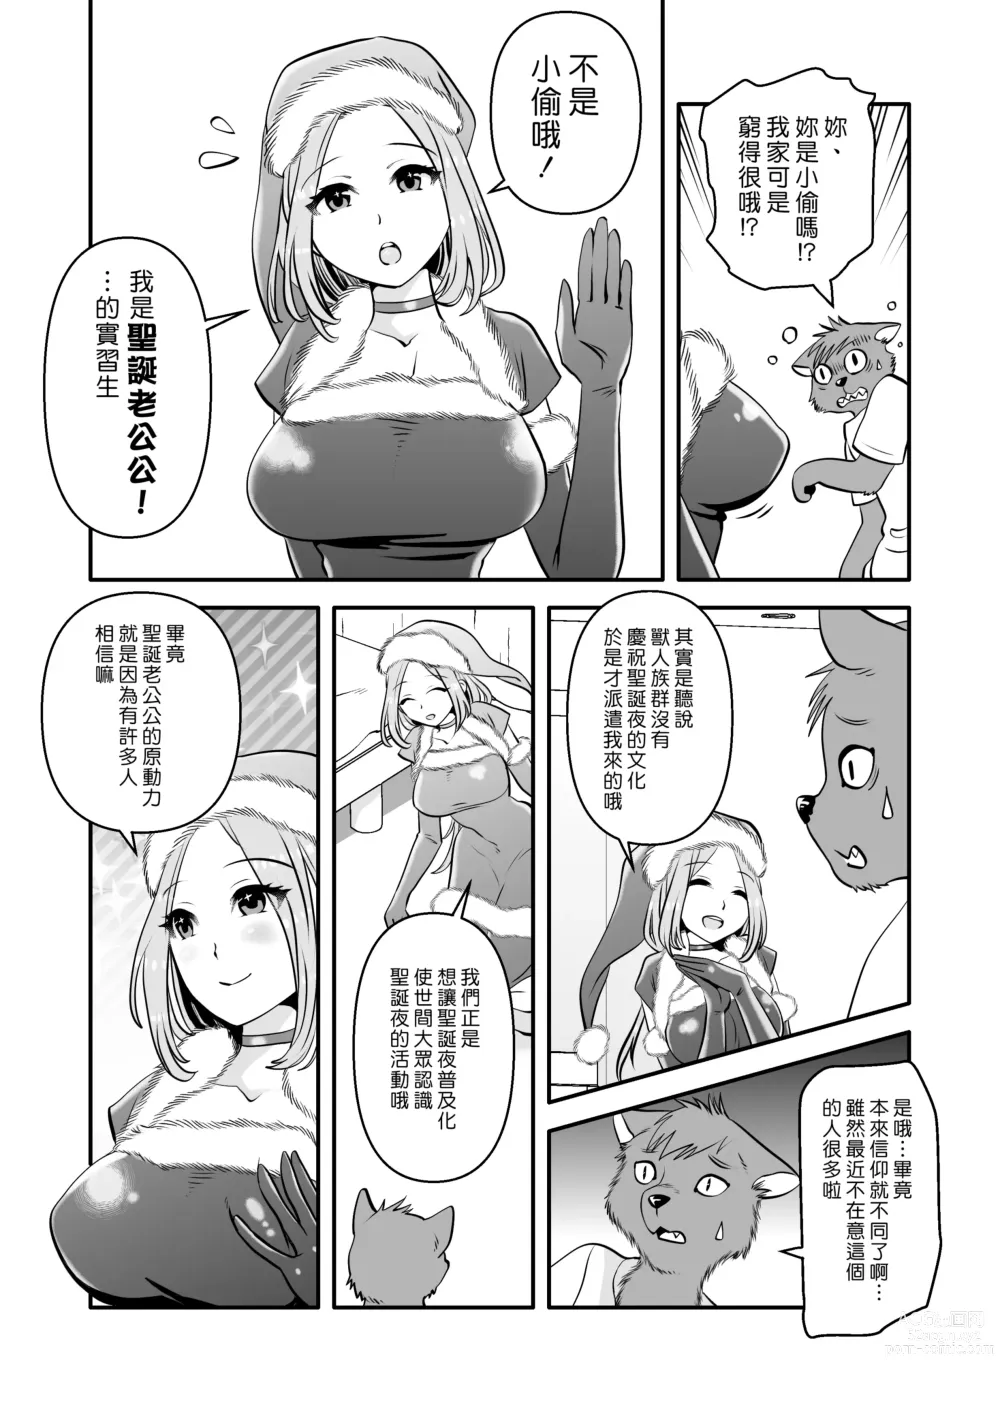 Page 6 of doujinshi 獸人君與聖誕大姊姊